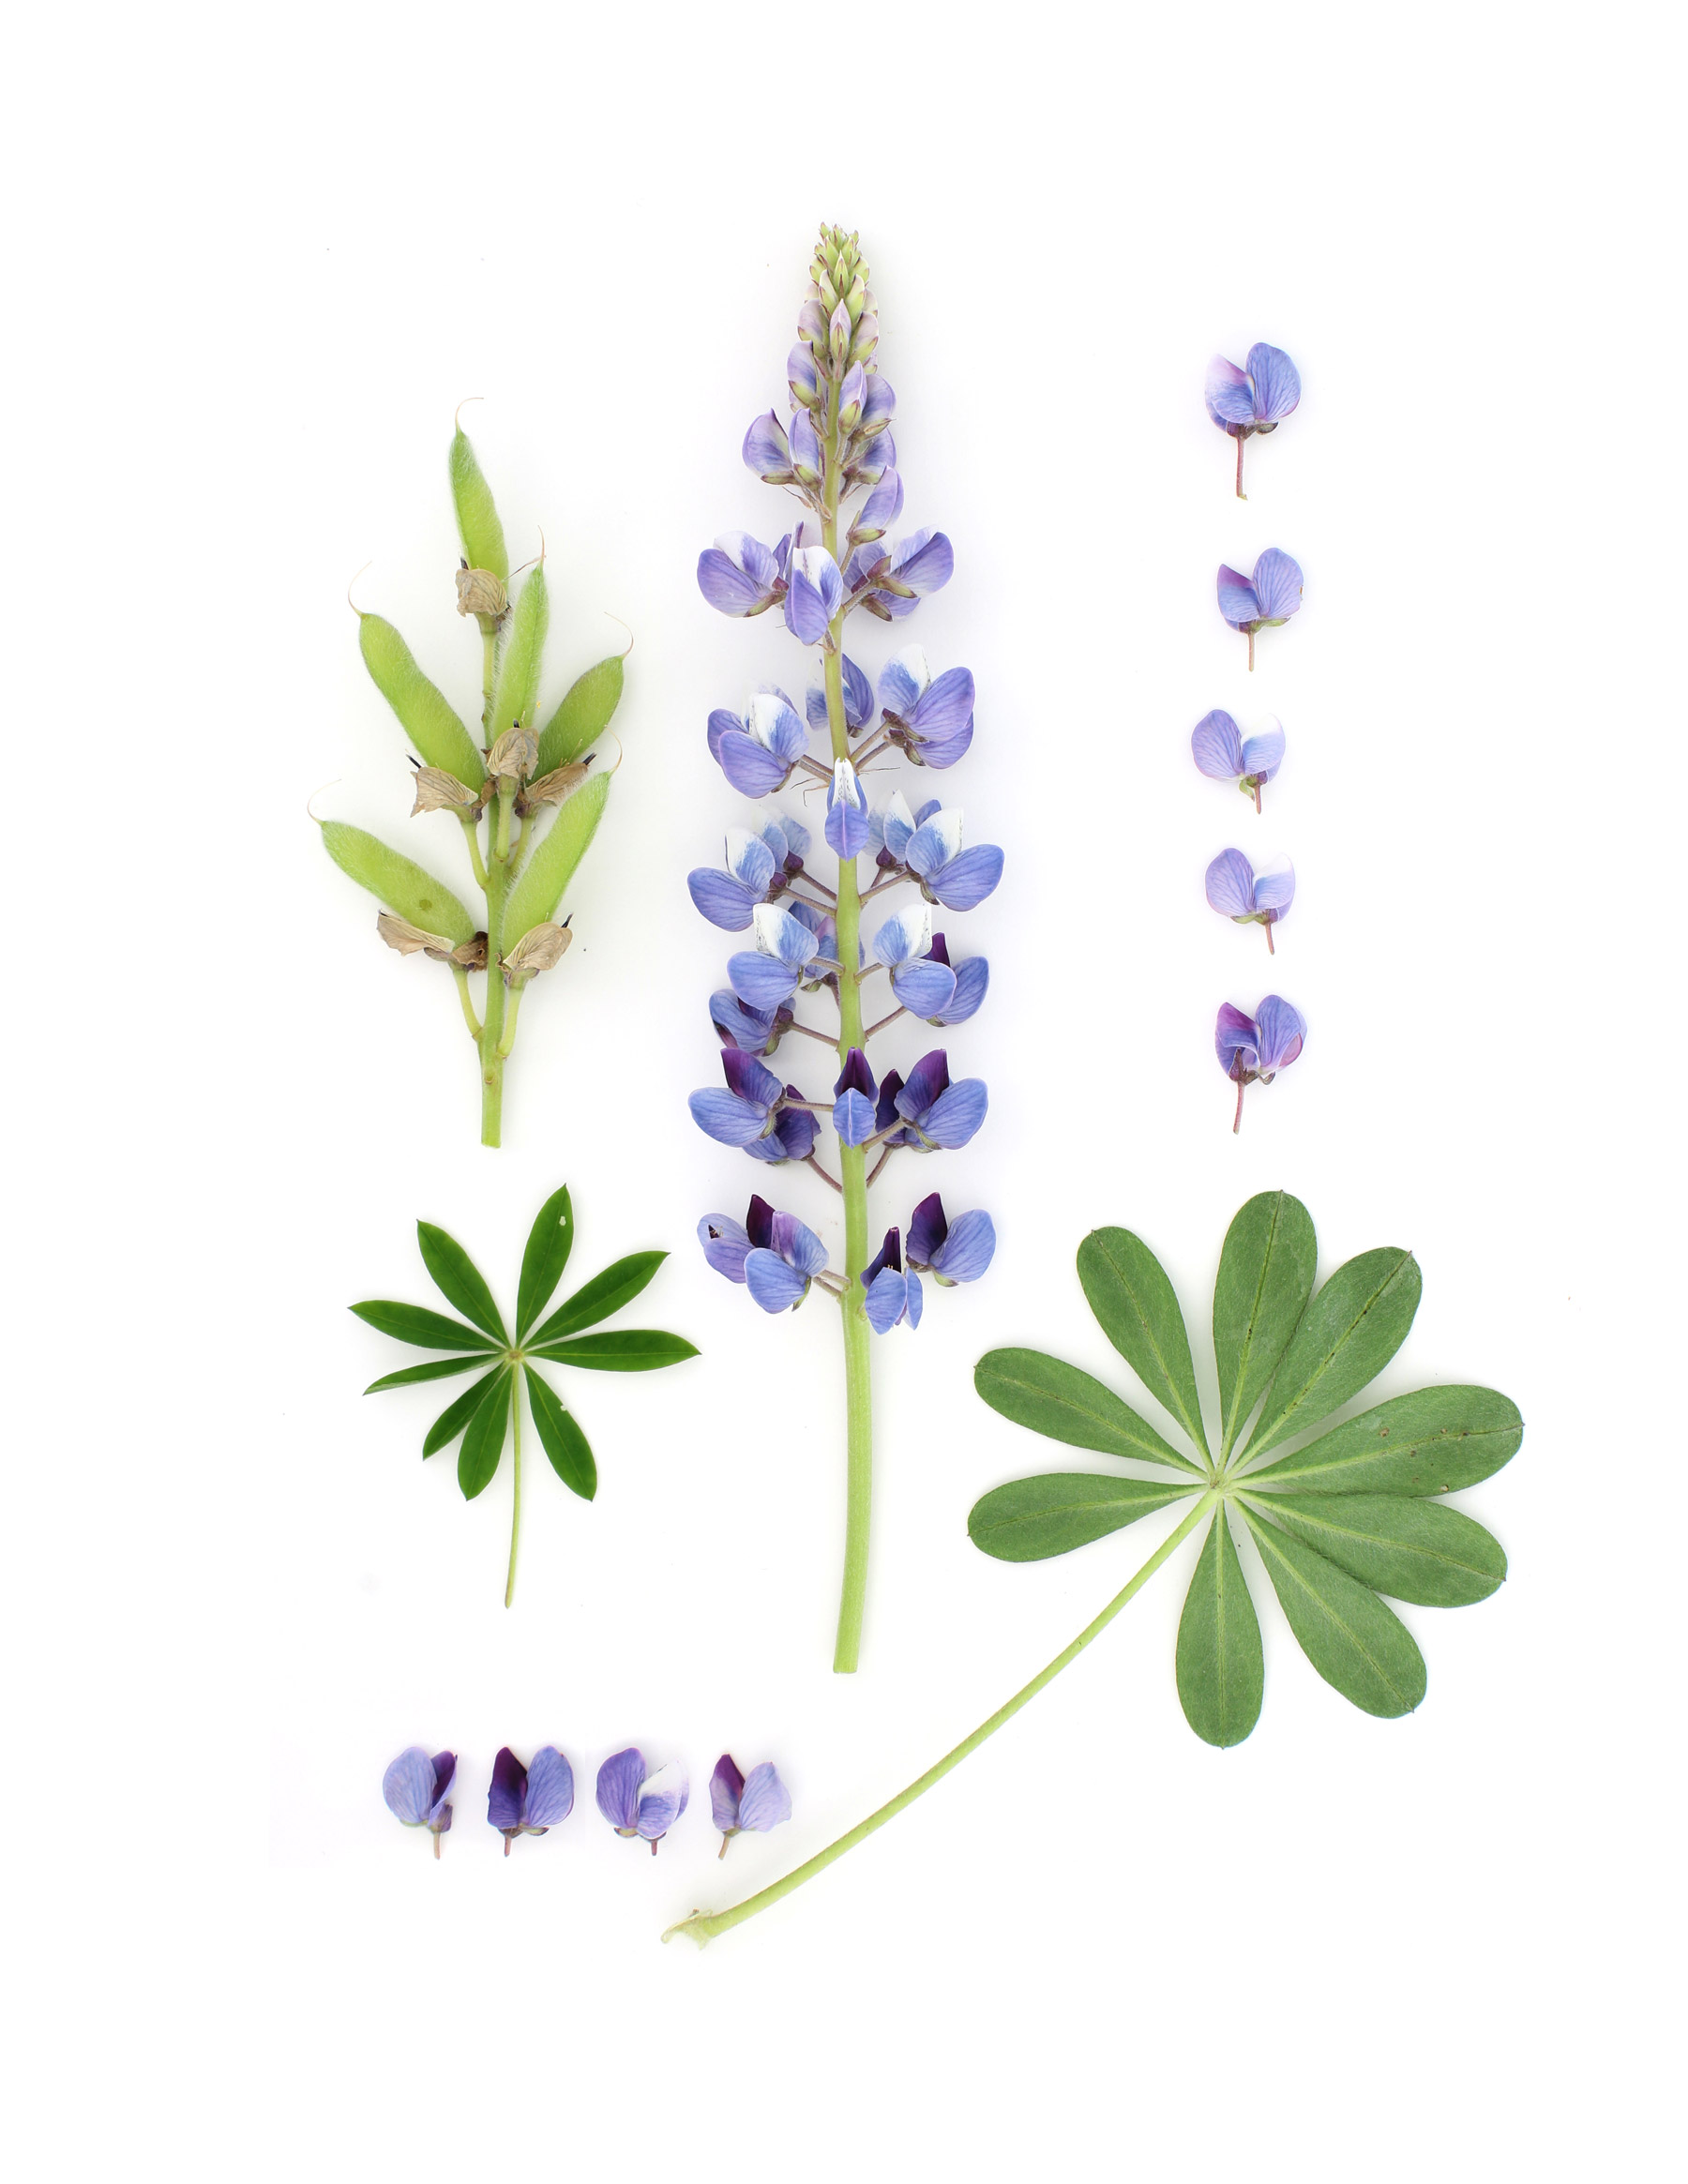 deconstructed lupine